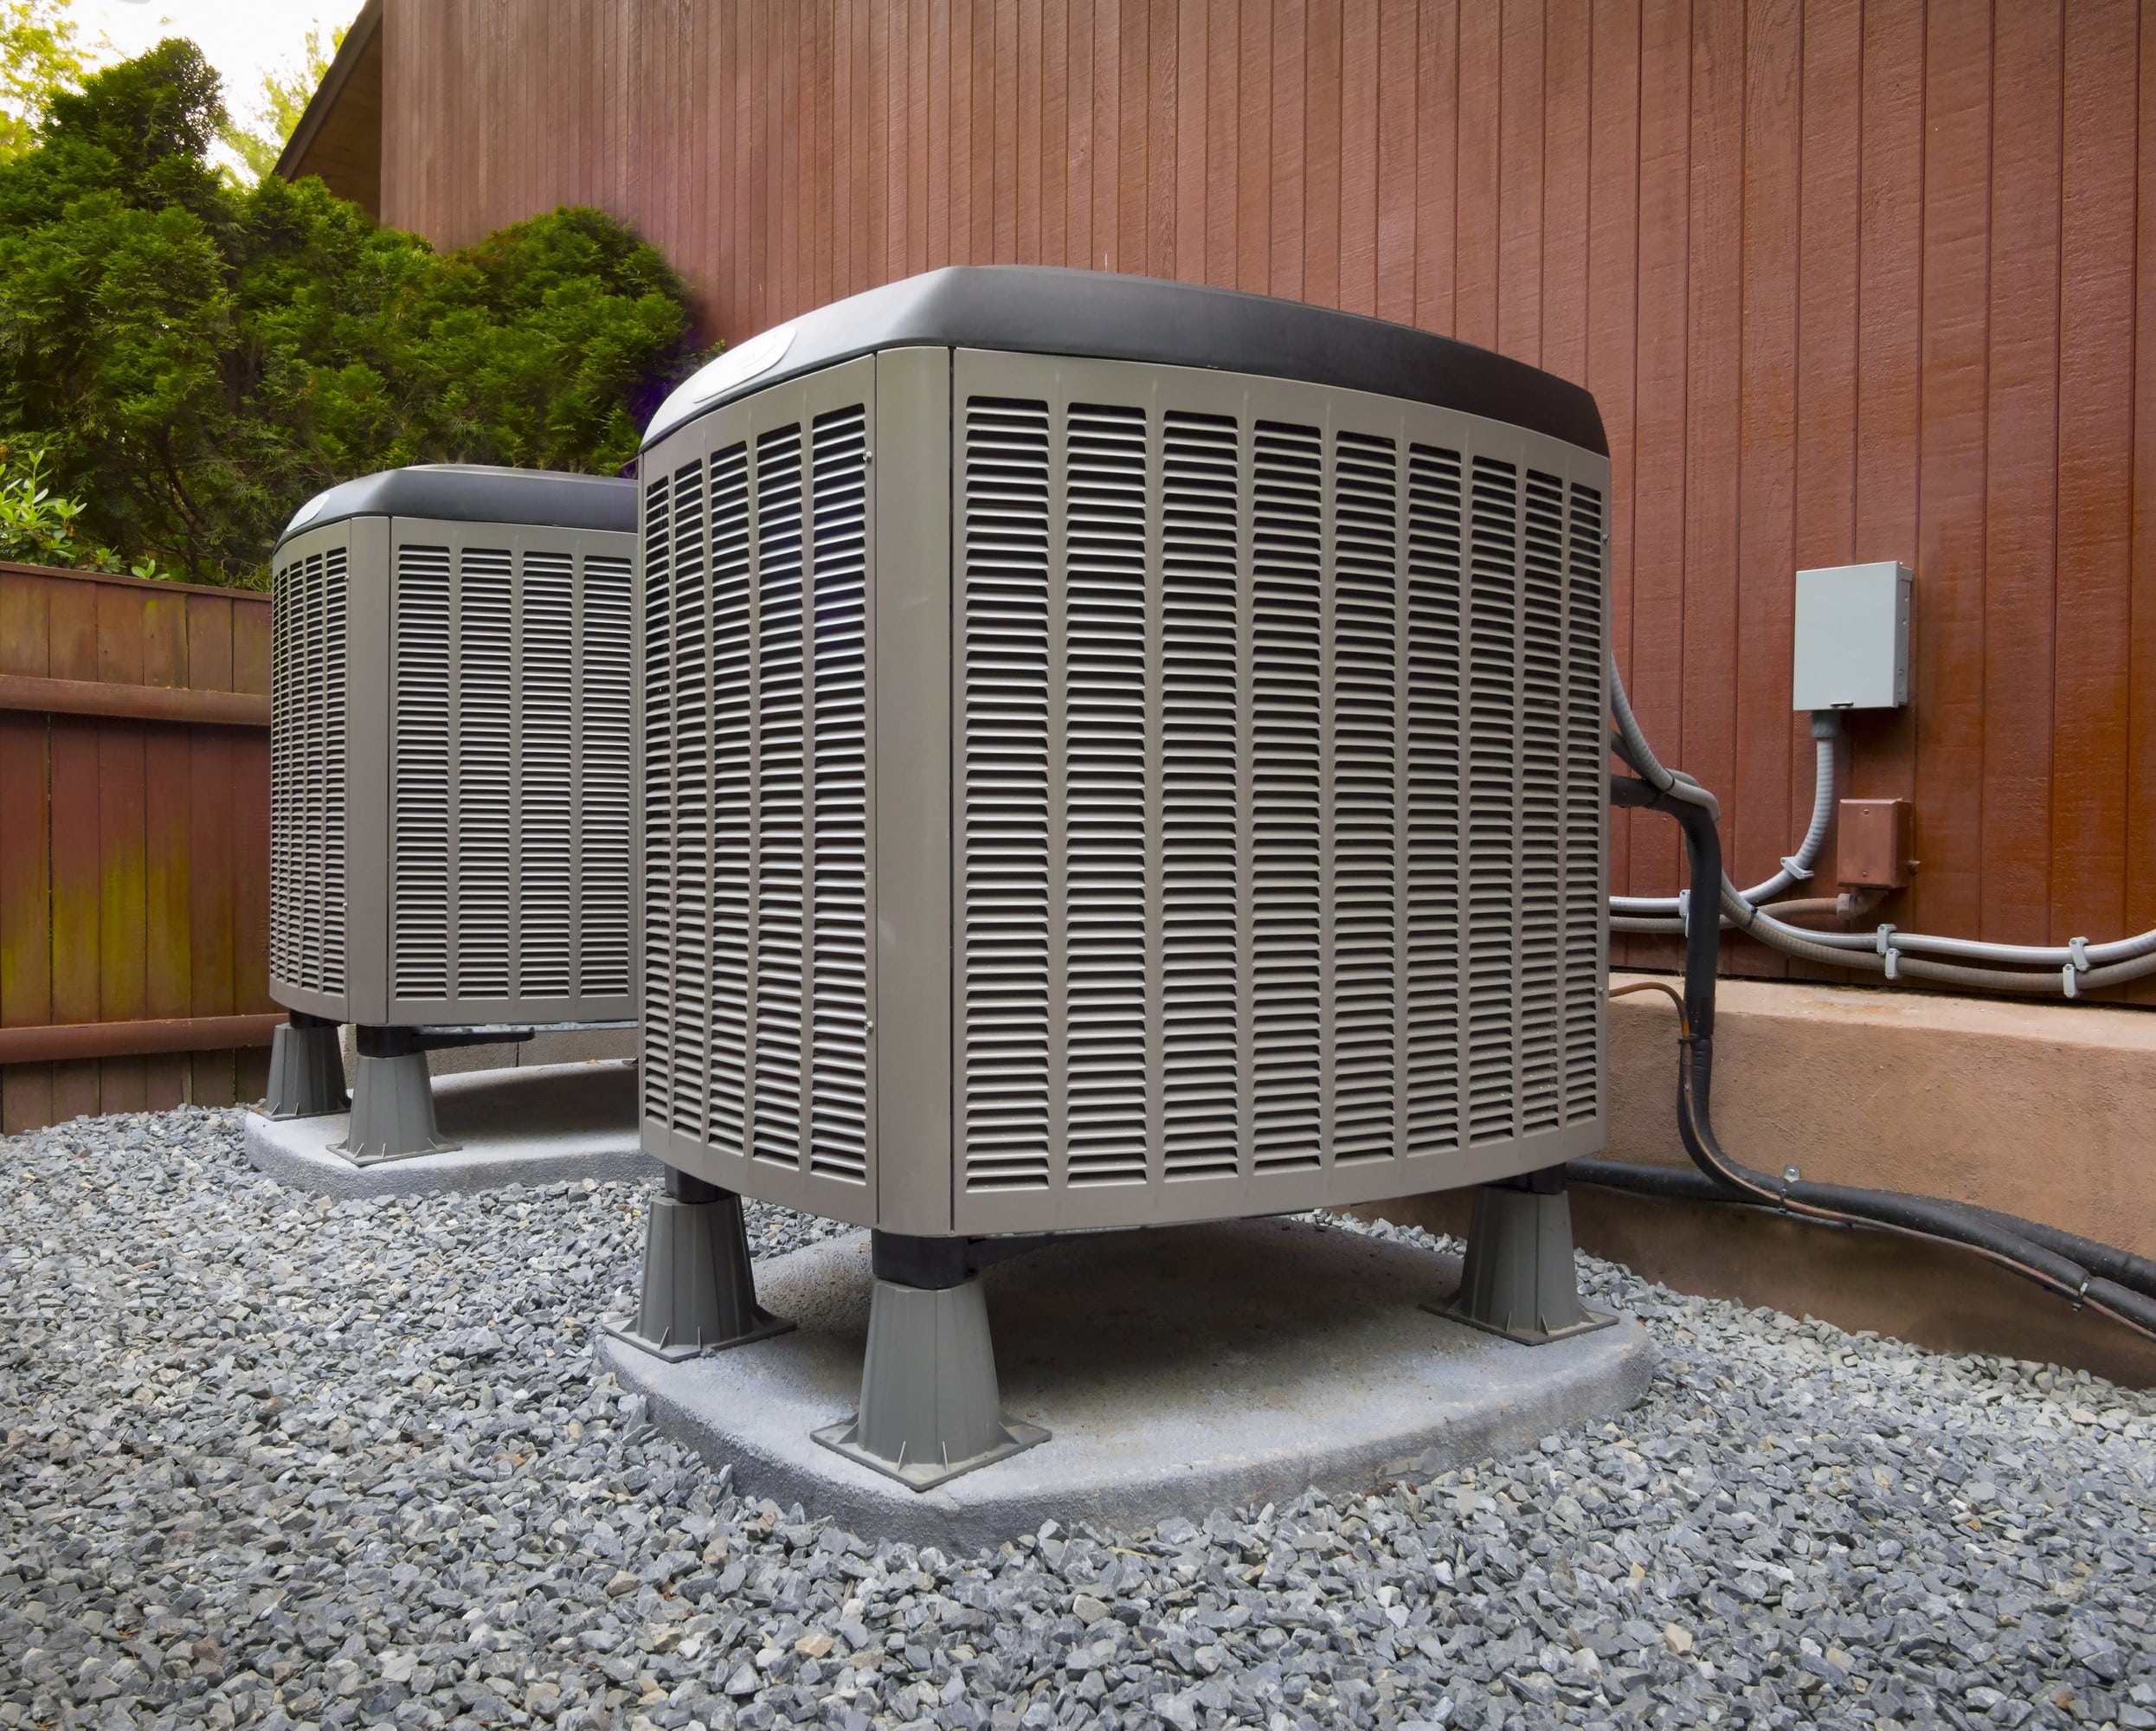 Heating and Air Conditioning Units